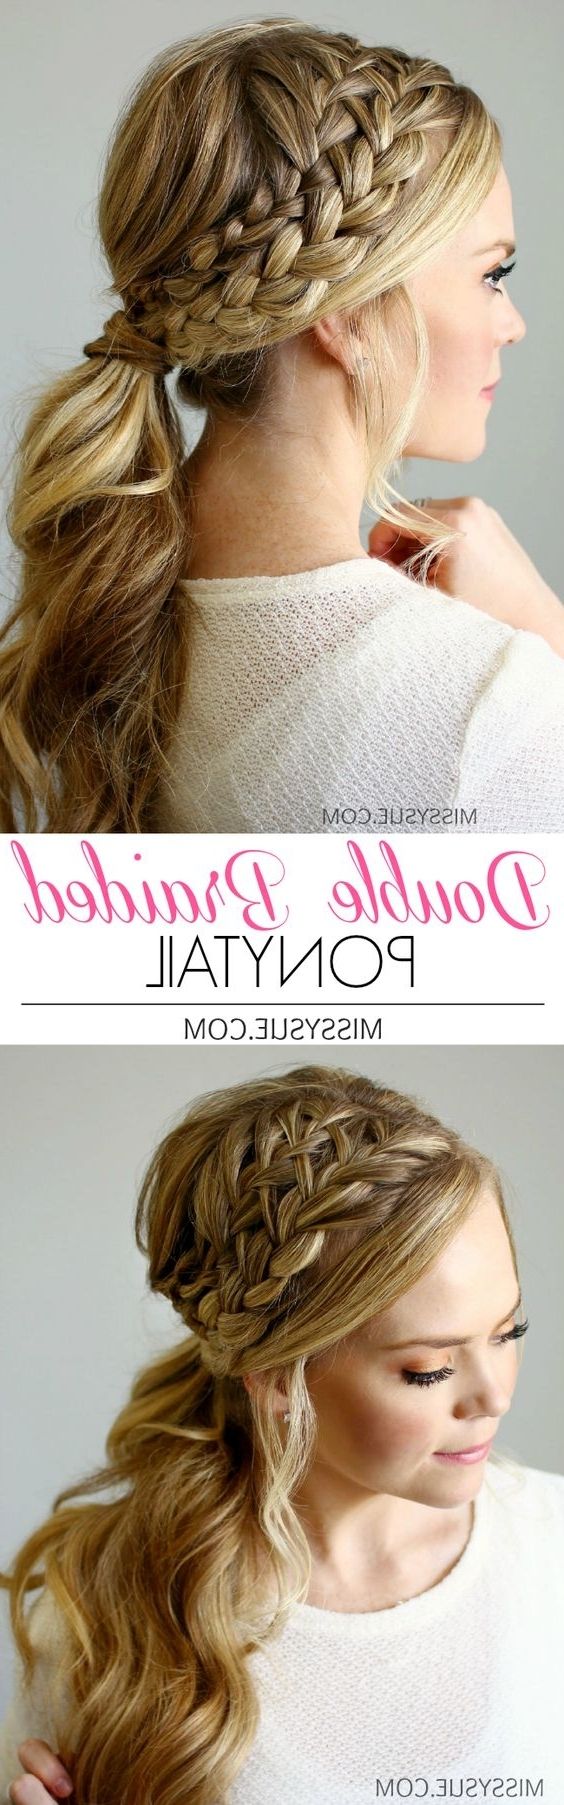 30 Simple Easy Ponytail Hairstyles For Lazy Girls – Ponytail Ideas 2018 Inside Current Messy Braid Ponytail Hairstyles (Gallery 20 of 20)